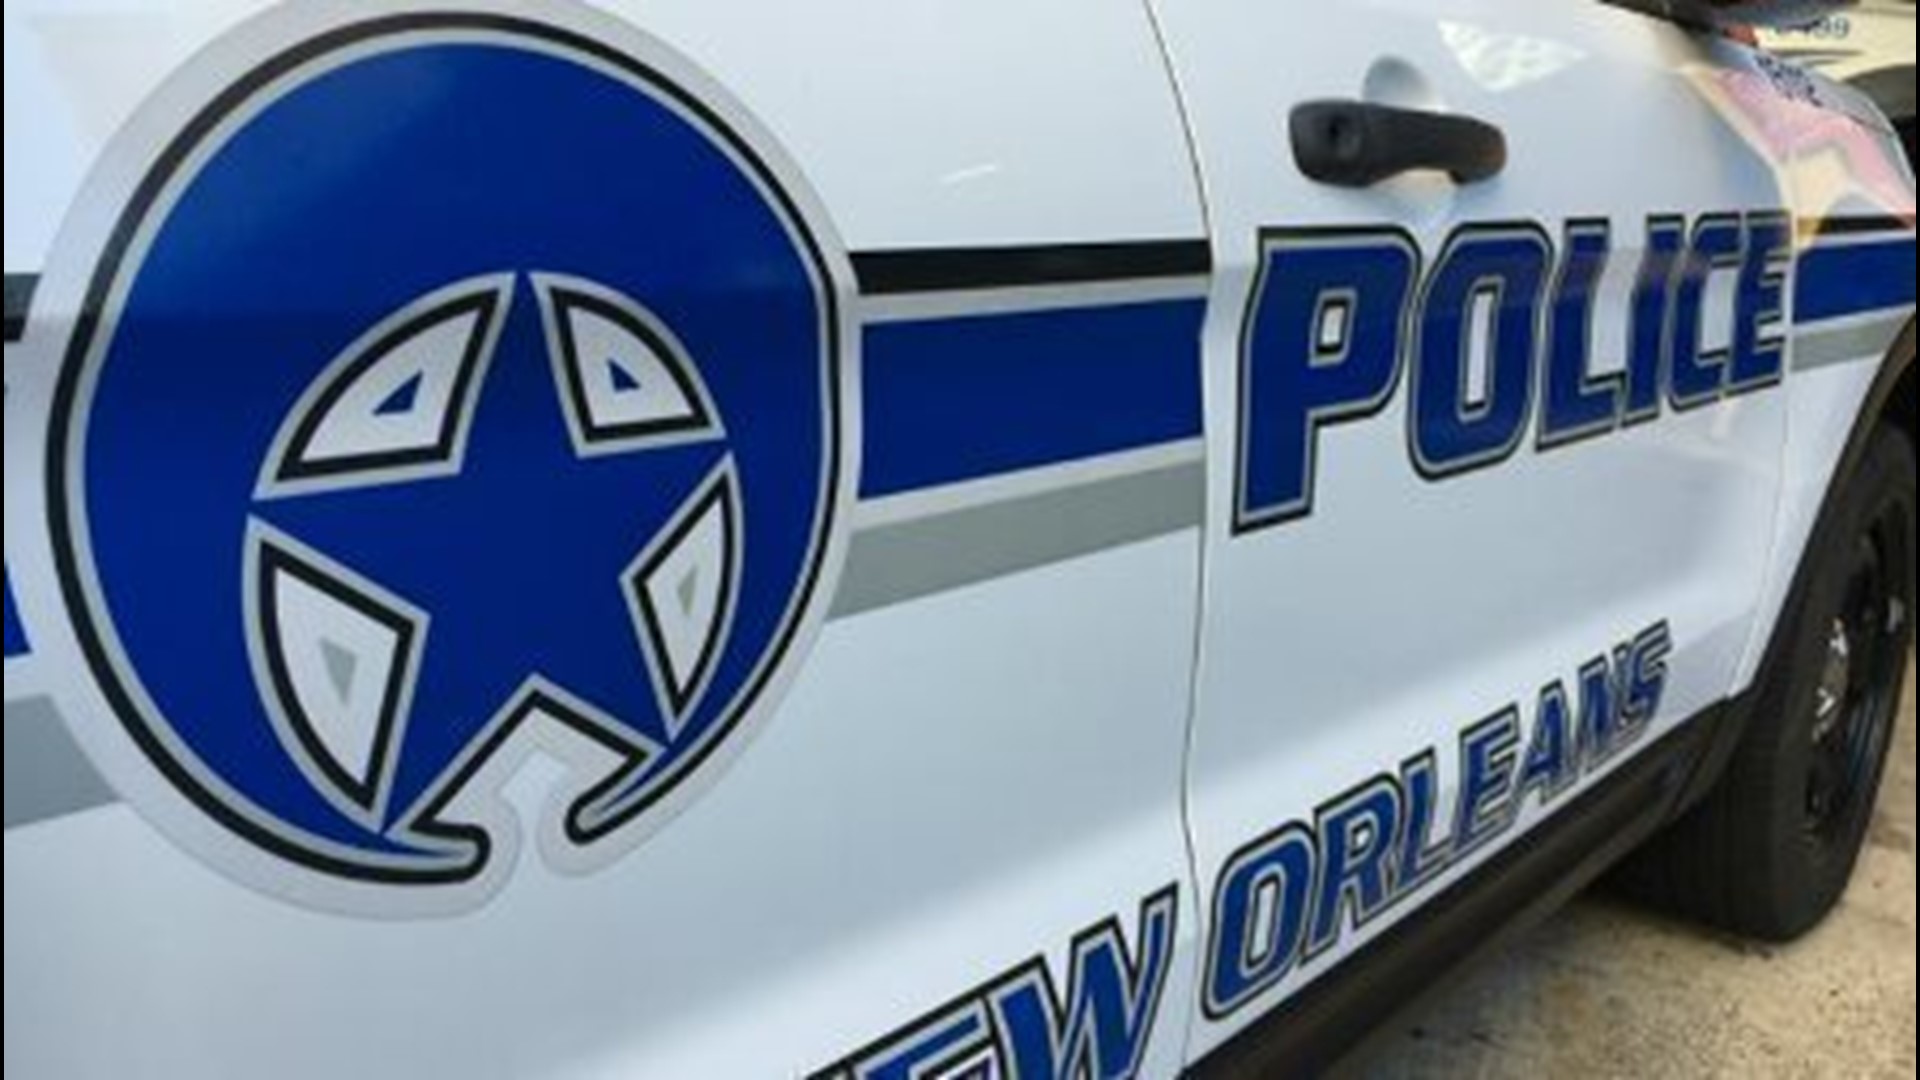 Two people were shot at Canal and Bourbon Streets, a man was shot in New Orleans East, and a Mid-City shooting killed a victim in the span of several hours.